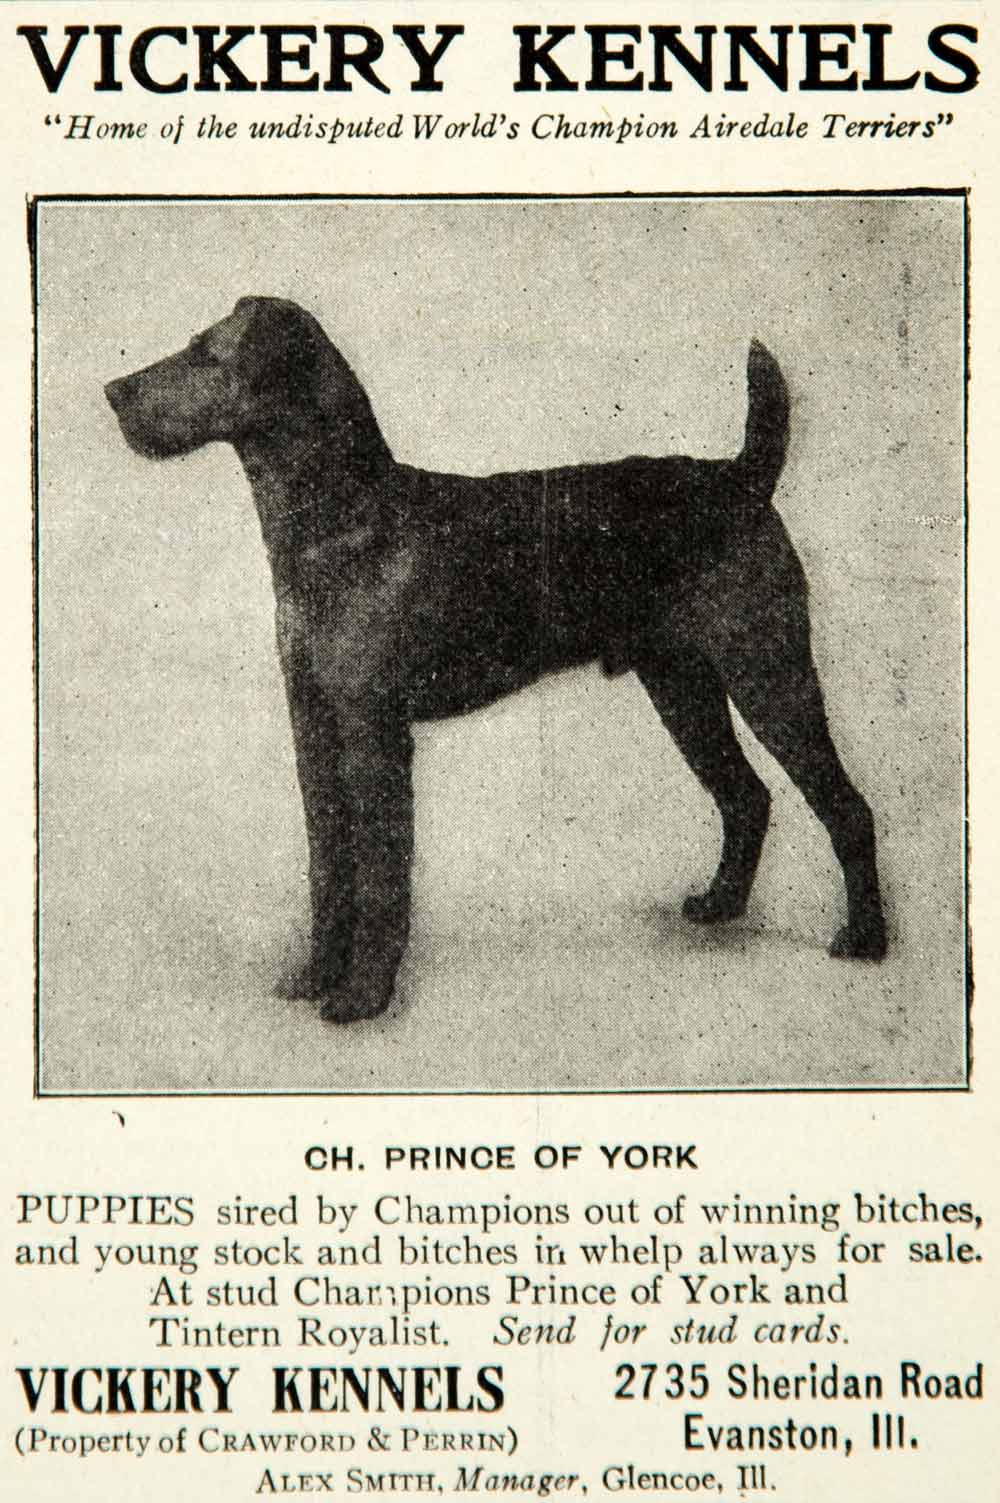 1912 Ad Vickery Kennels Airedale Terrier Dog Breed 2735 Sheridan Rd YNS1